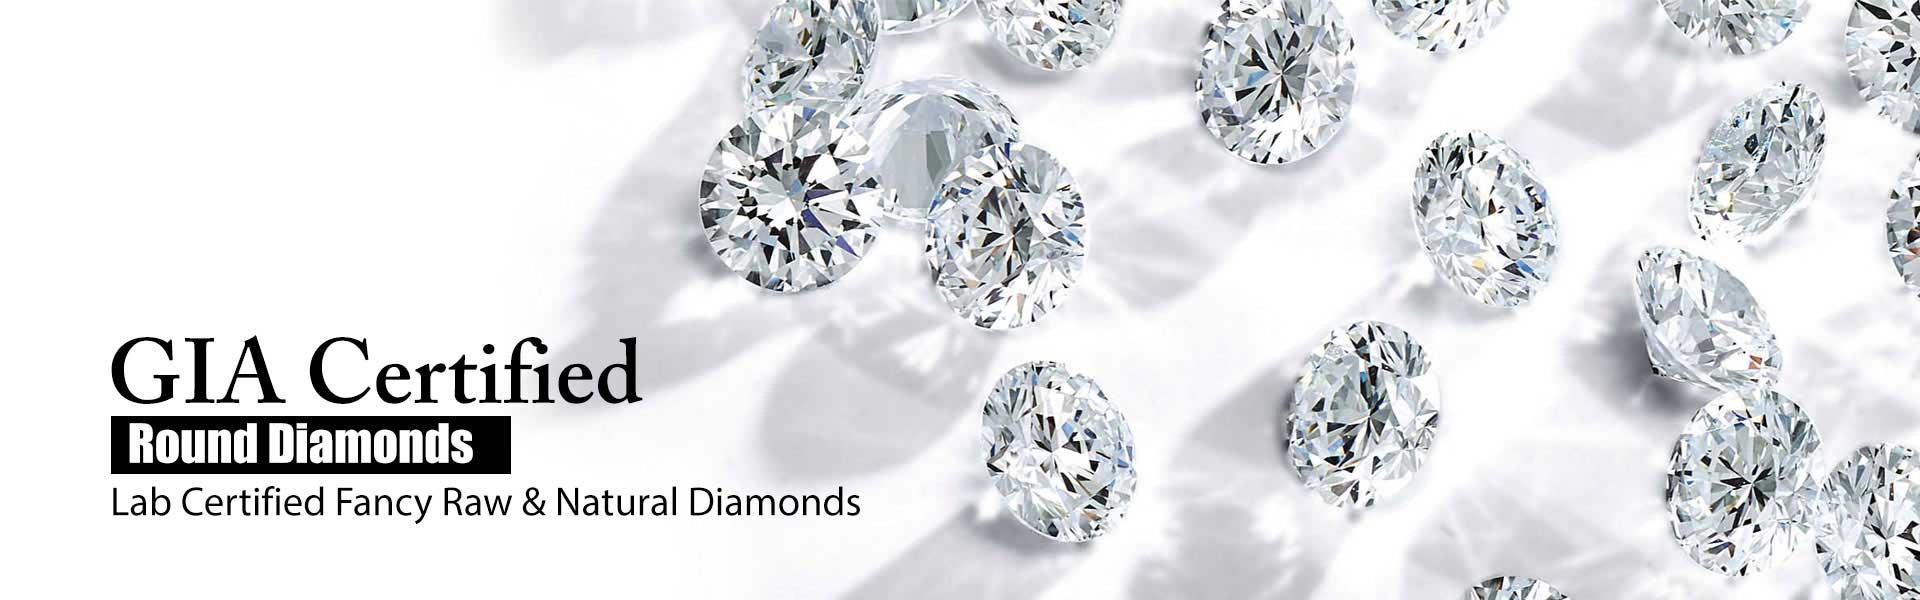  Certified Diamond  Manufacturers in Cape Town